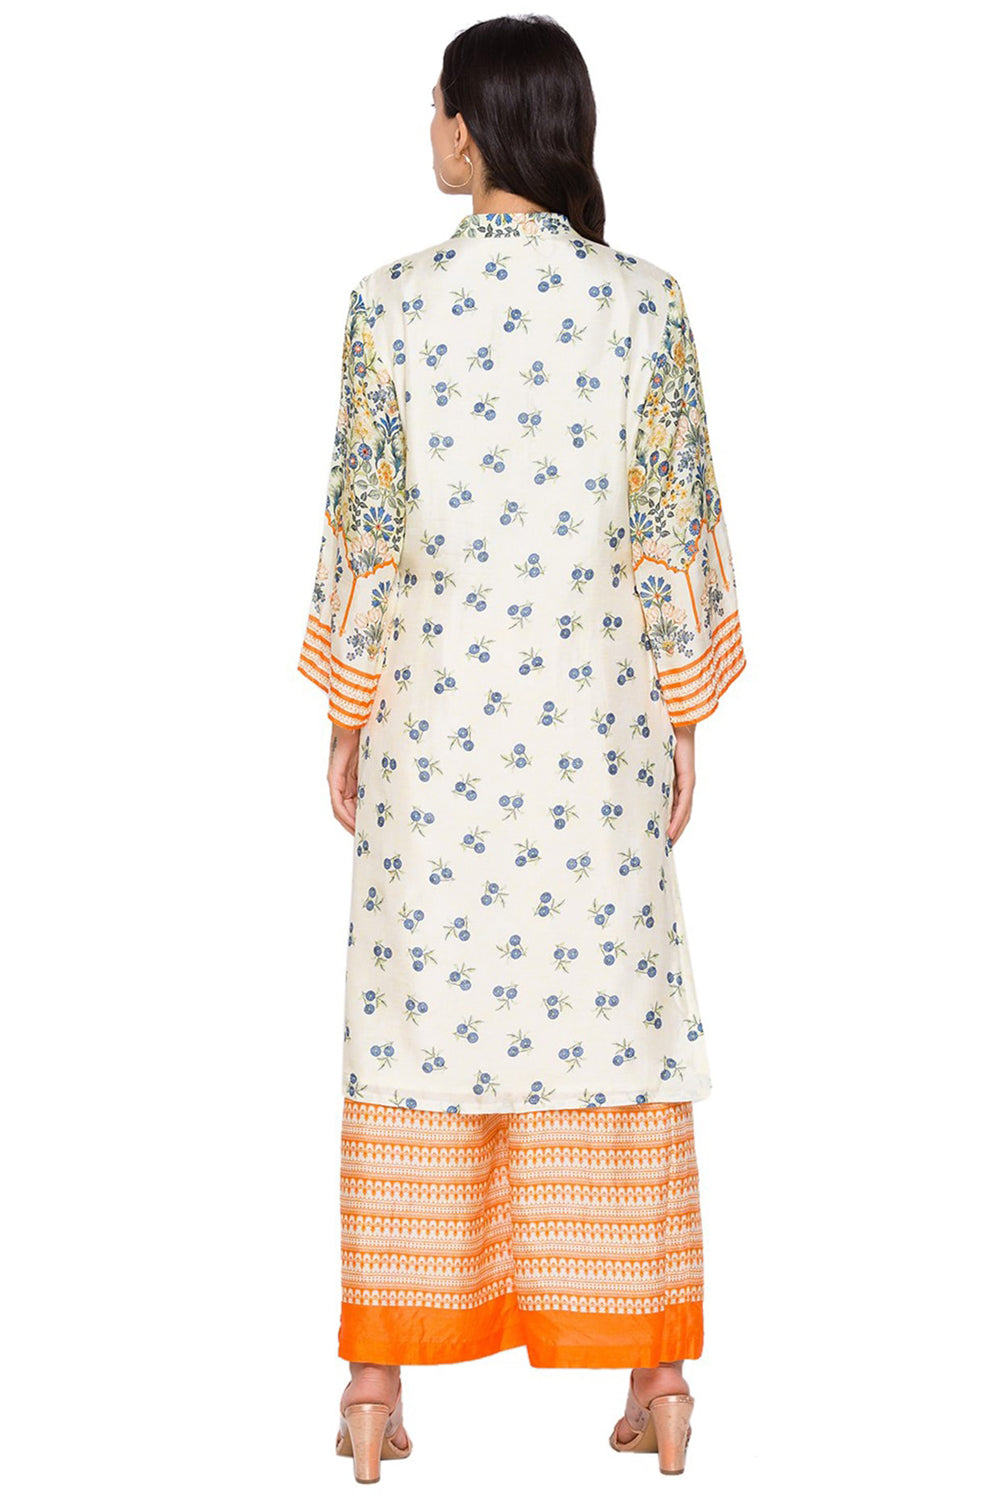 Eden Printed Kurta With Front Opening Paired With Pants